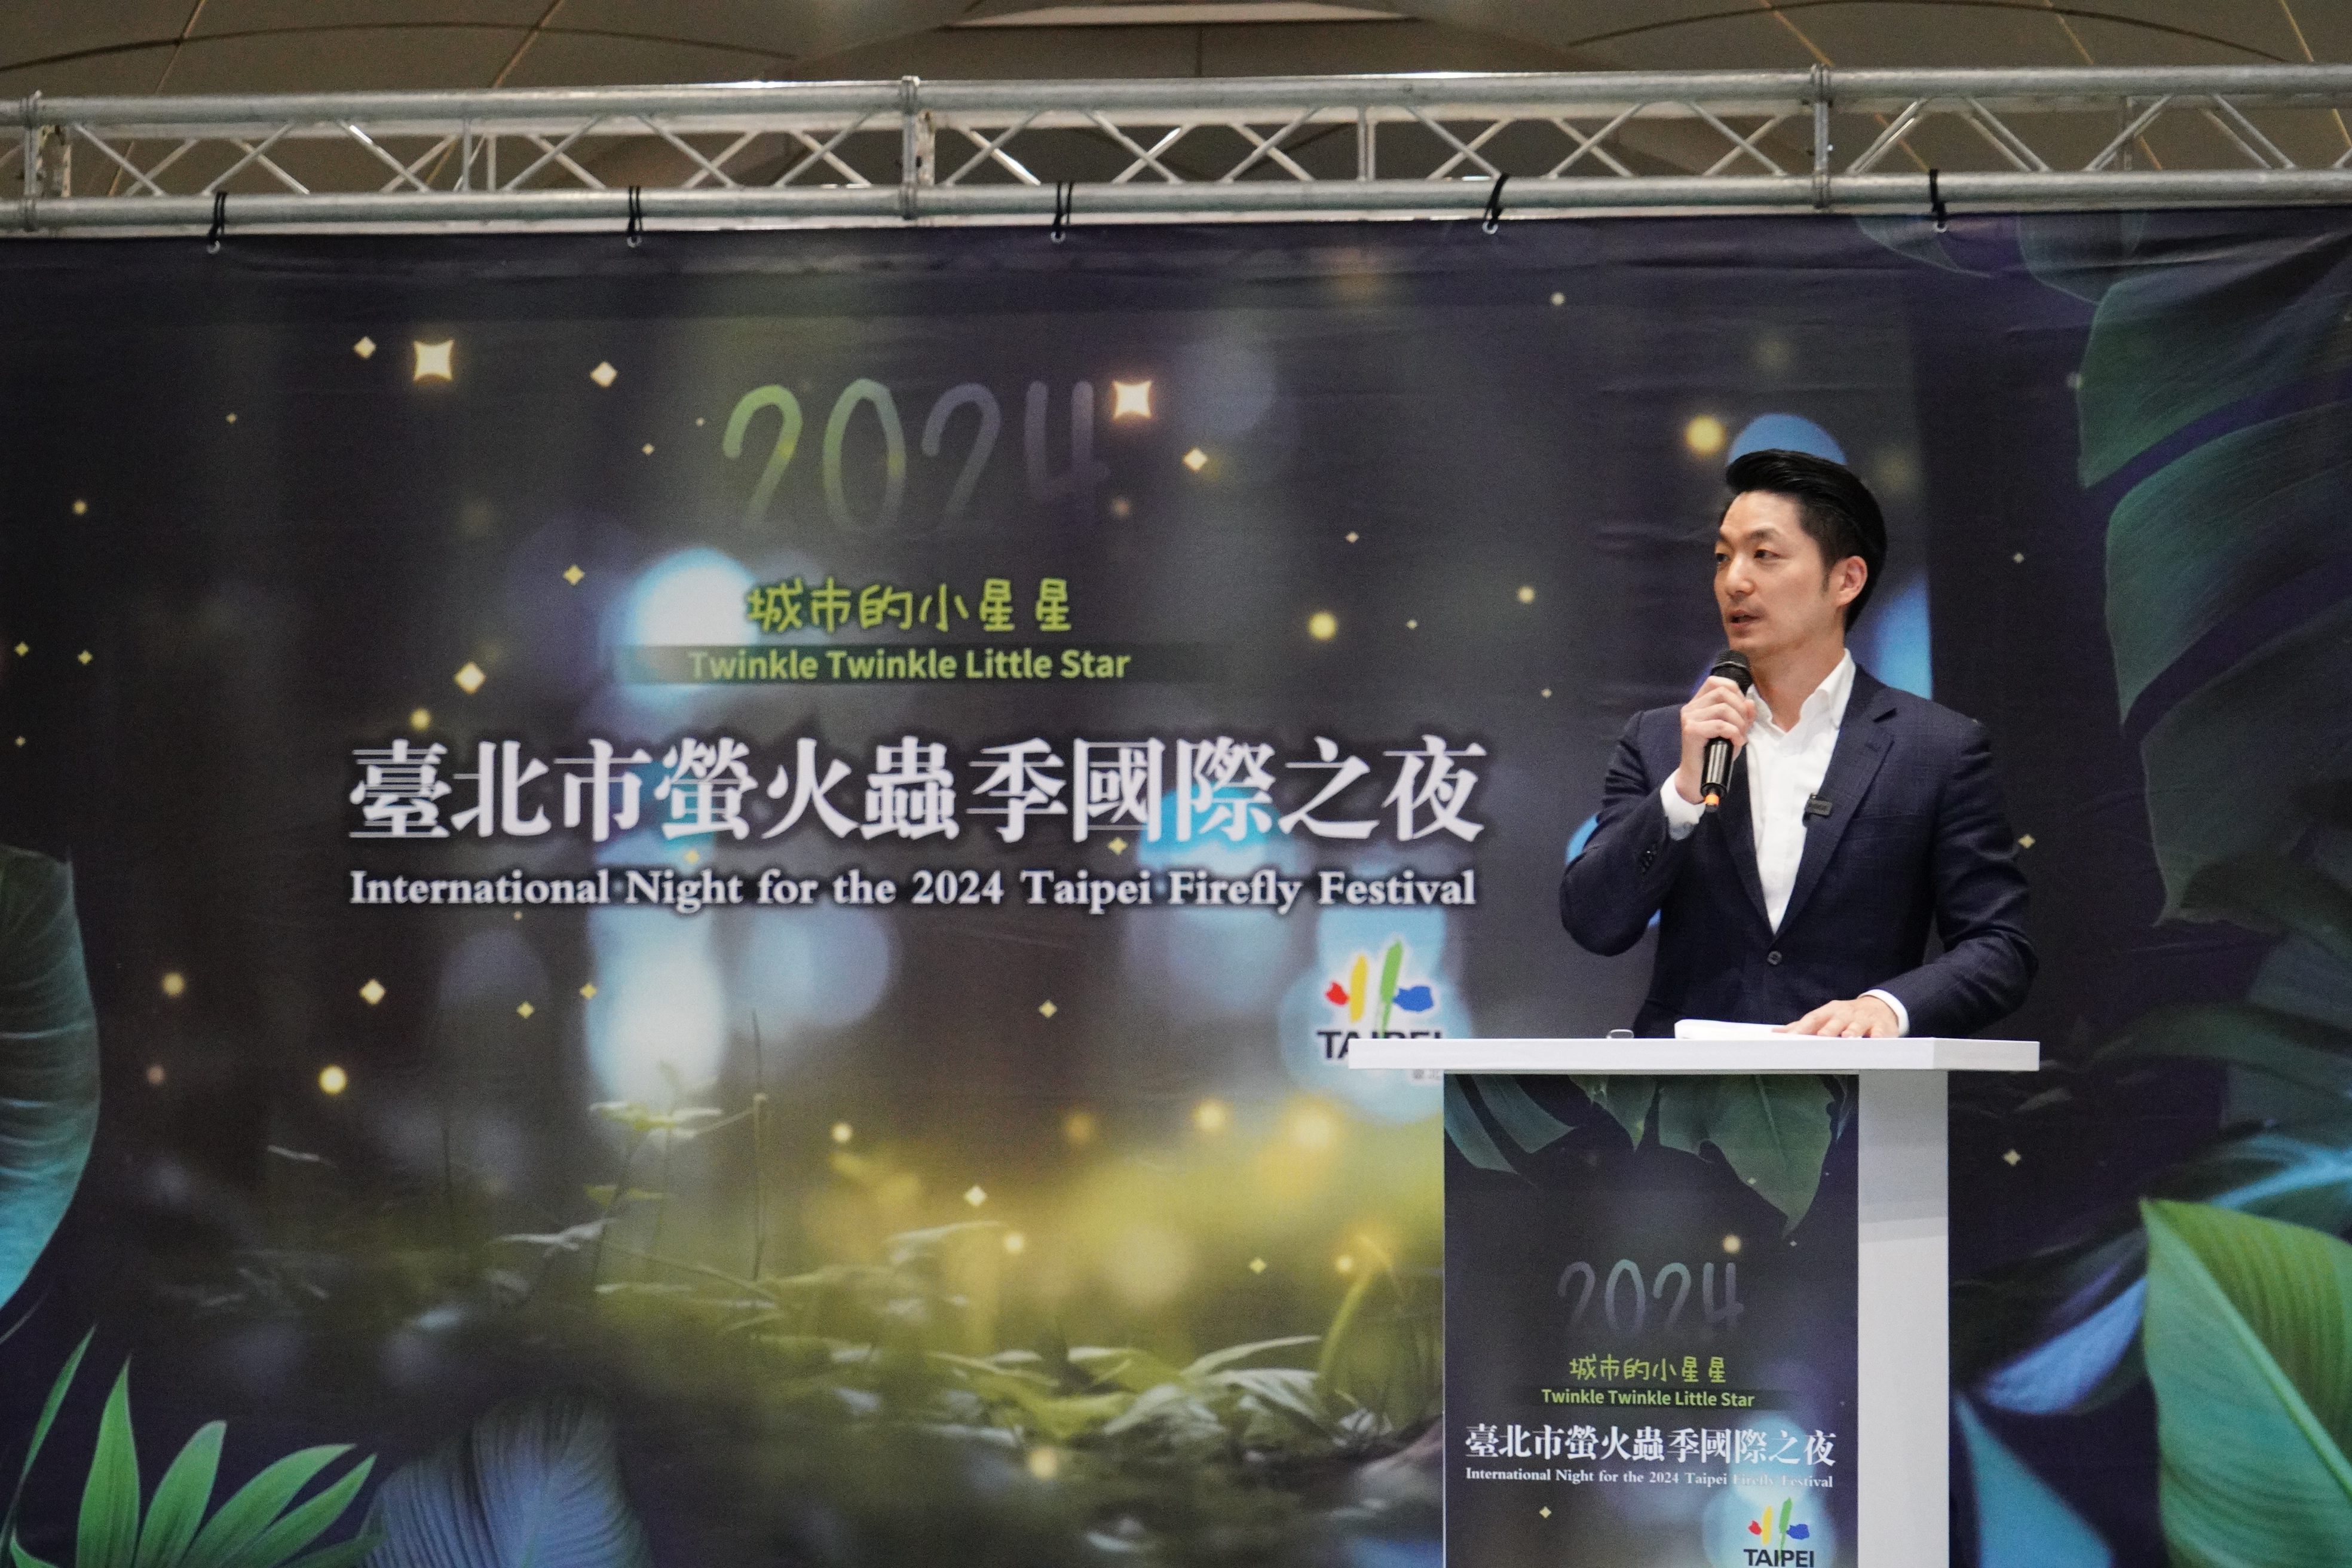 0429-Mayor Chiang attends the International Night for the 2024 Taipei Firefly Festival